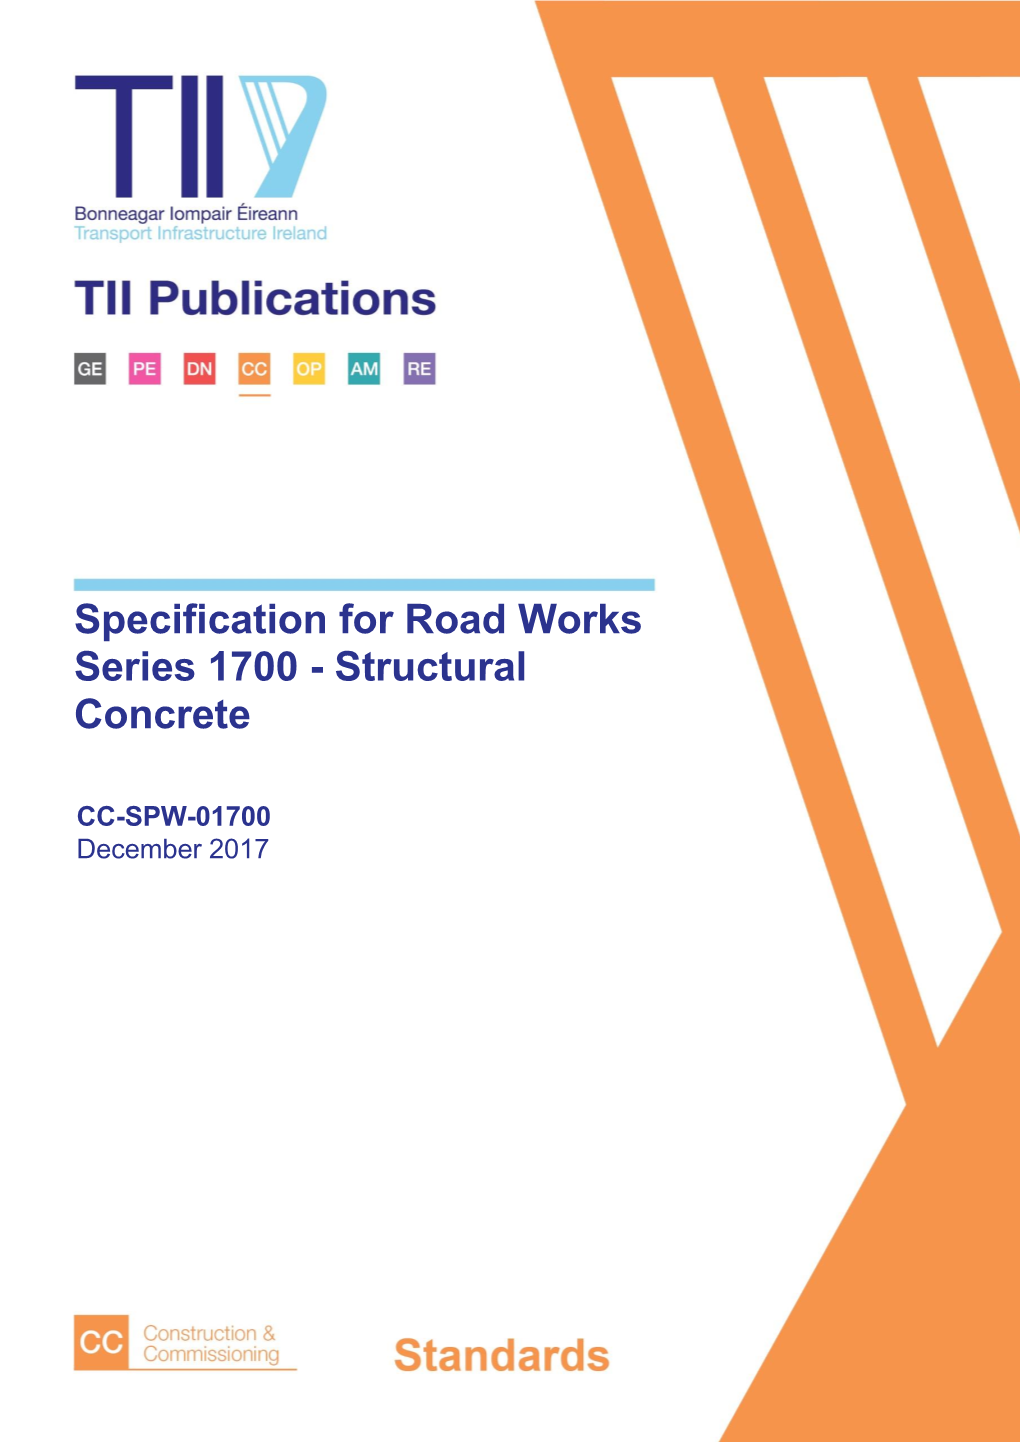 Specification for Road Works Series 1700 - Structural Concrete